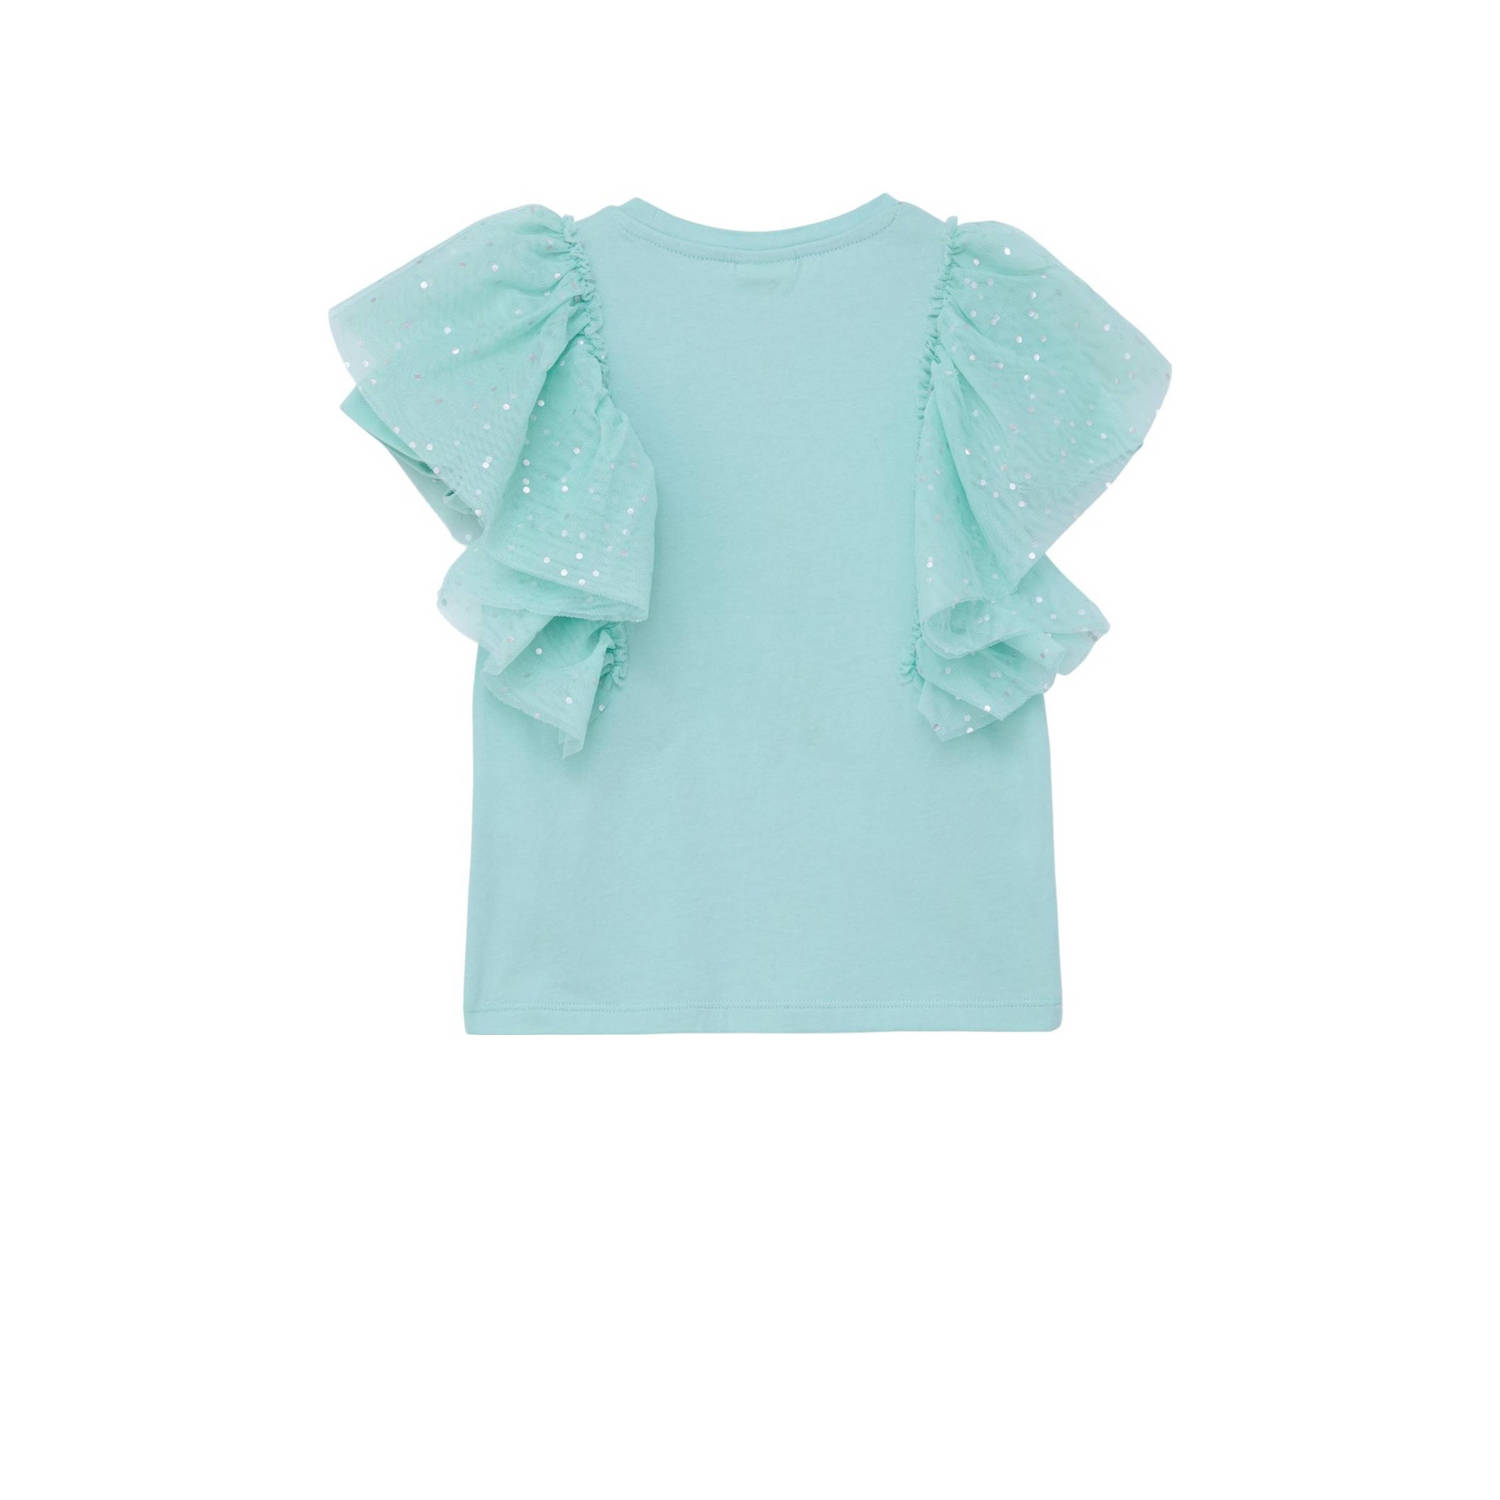 s.Oliver T-shirt met ruches turquoise